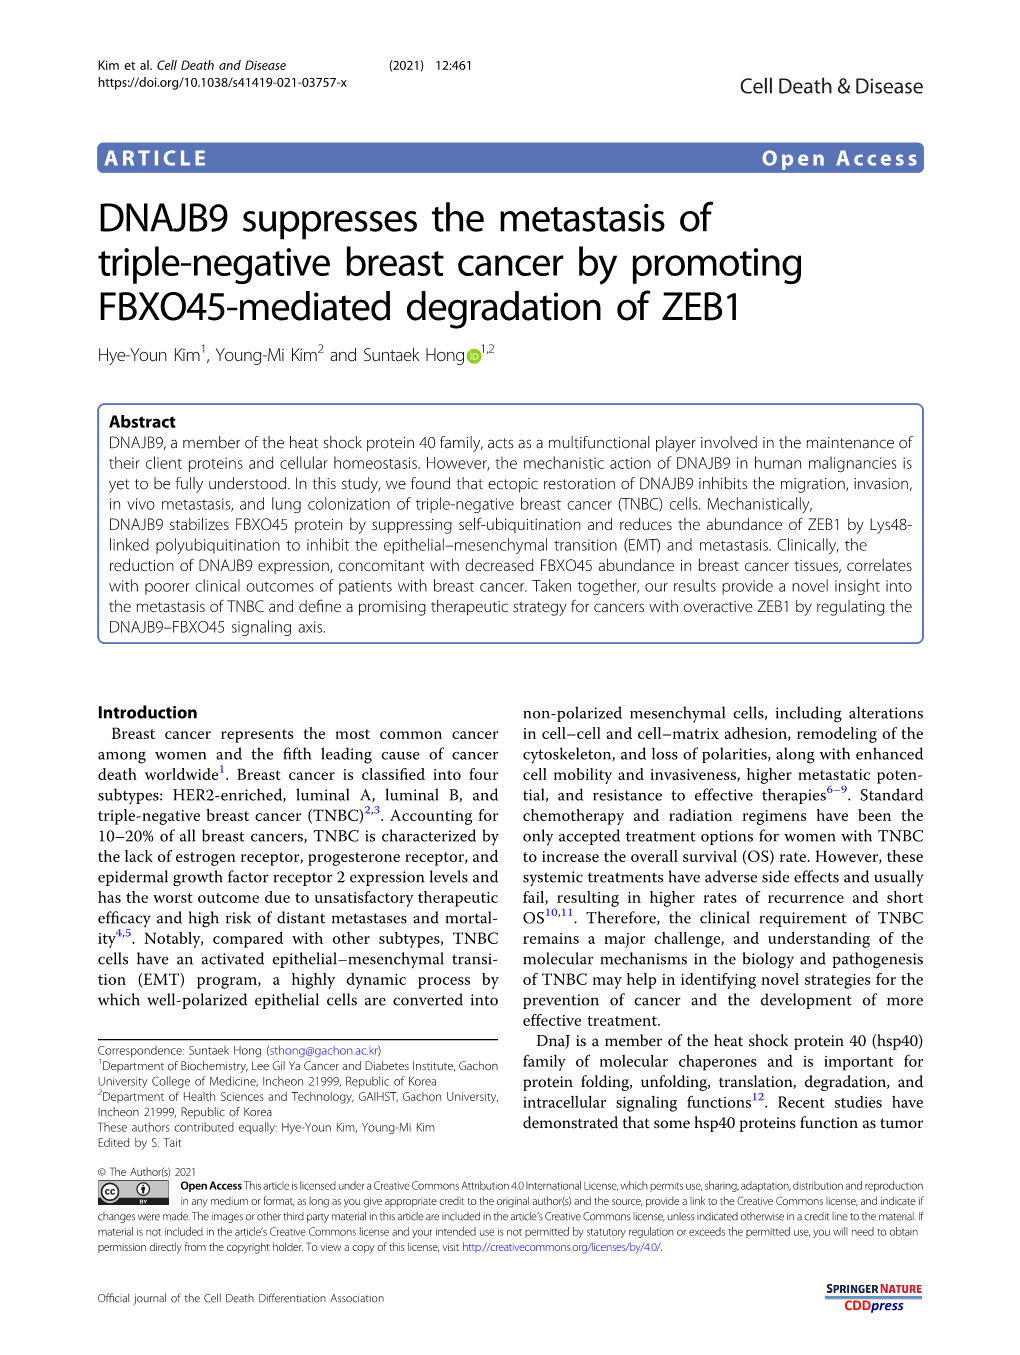 DNAJB9 Suppresses the Metastasis of Triple-Negative Breast Cancer by Promoting FBXO45-Mediated Degradation of ZEB1 Hye-Youn Kim1, Young-Mi Kim2 and Suntaek Hong 1,2